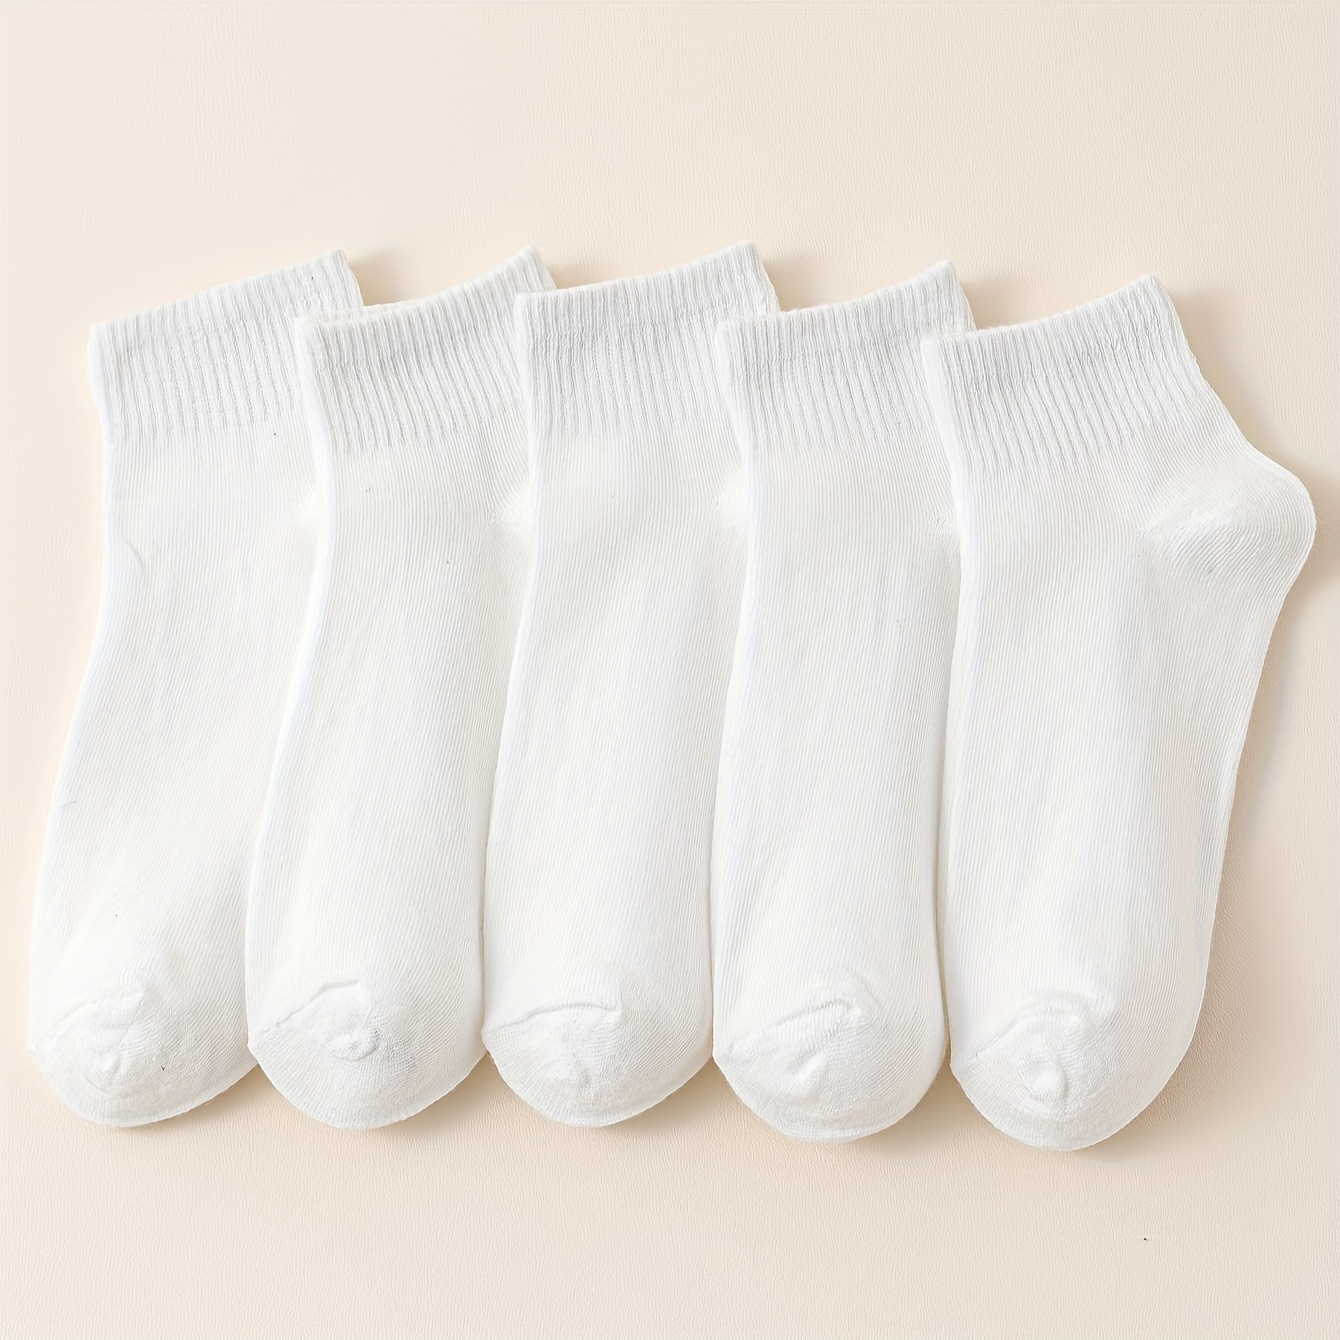 

5 Pairs Solid Crew Socks, Comfy & Breathable All-match Socks, Women's Stockings & Hosiery